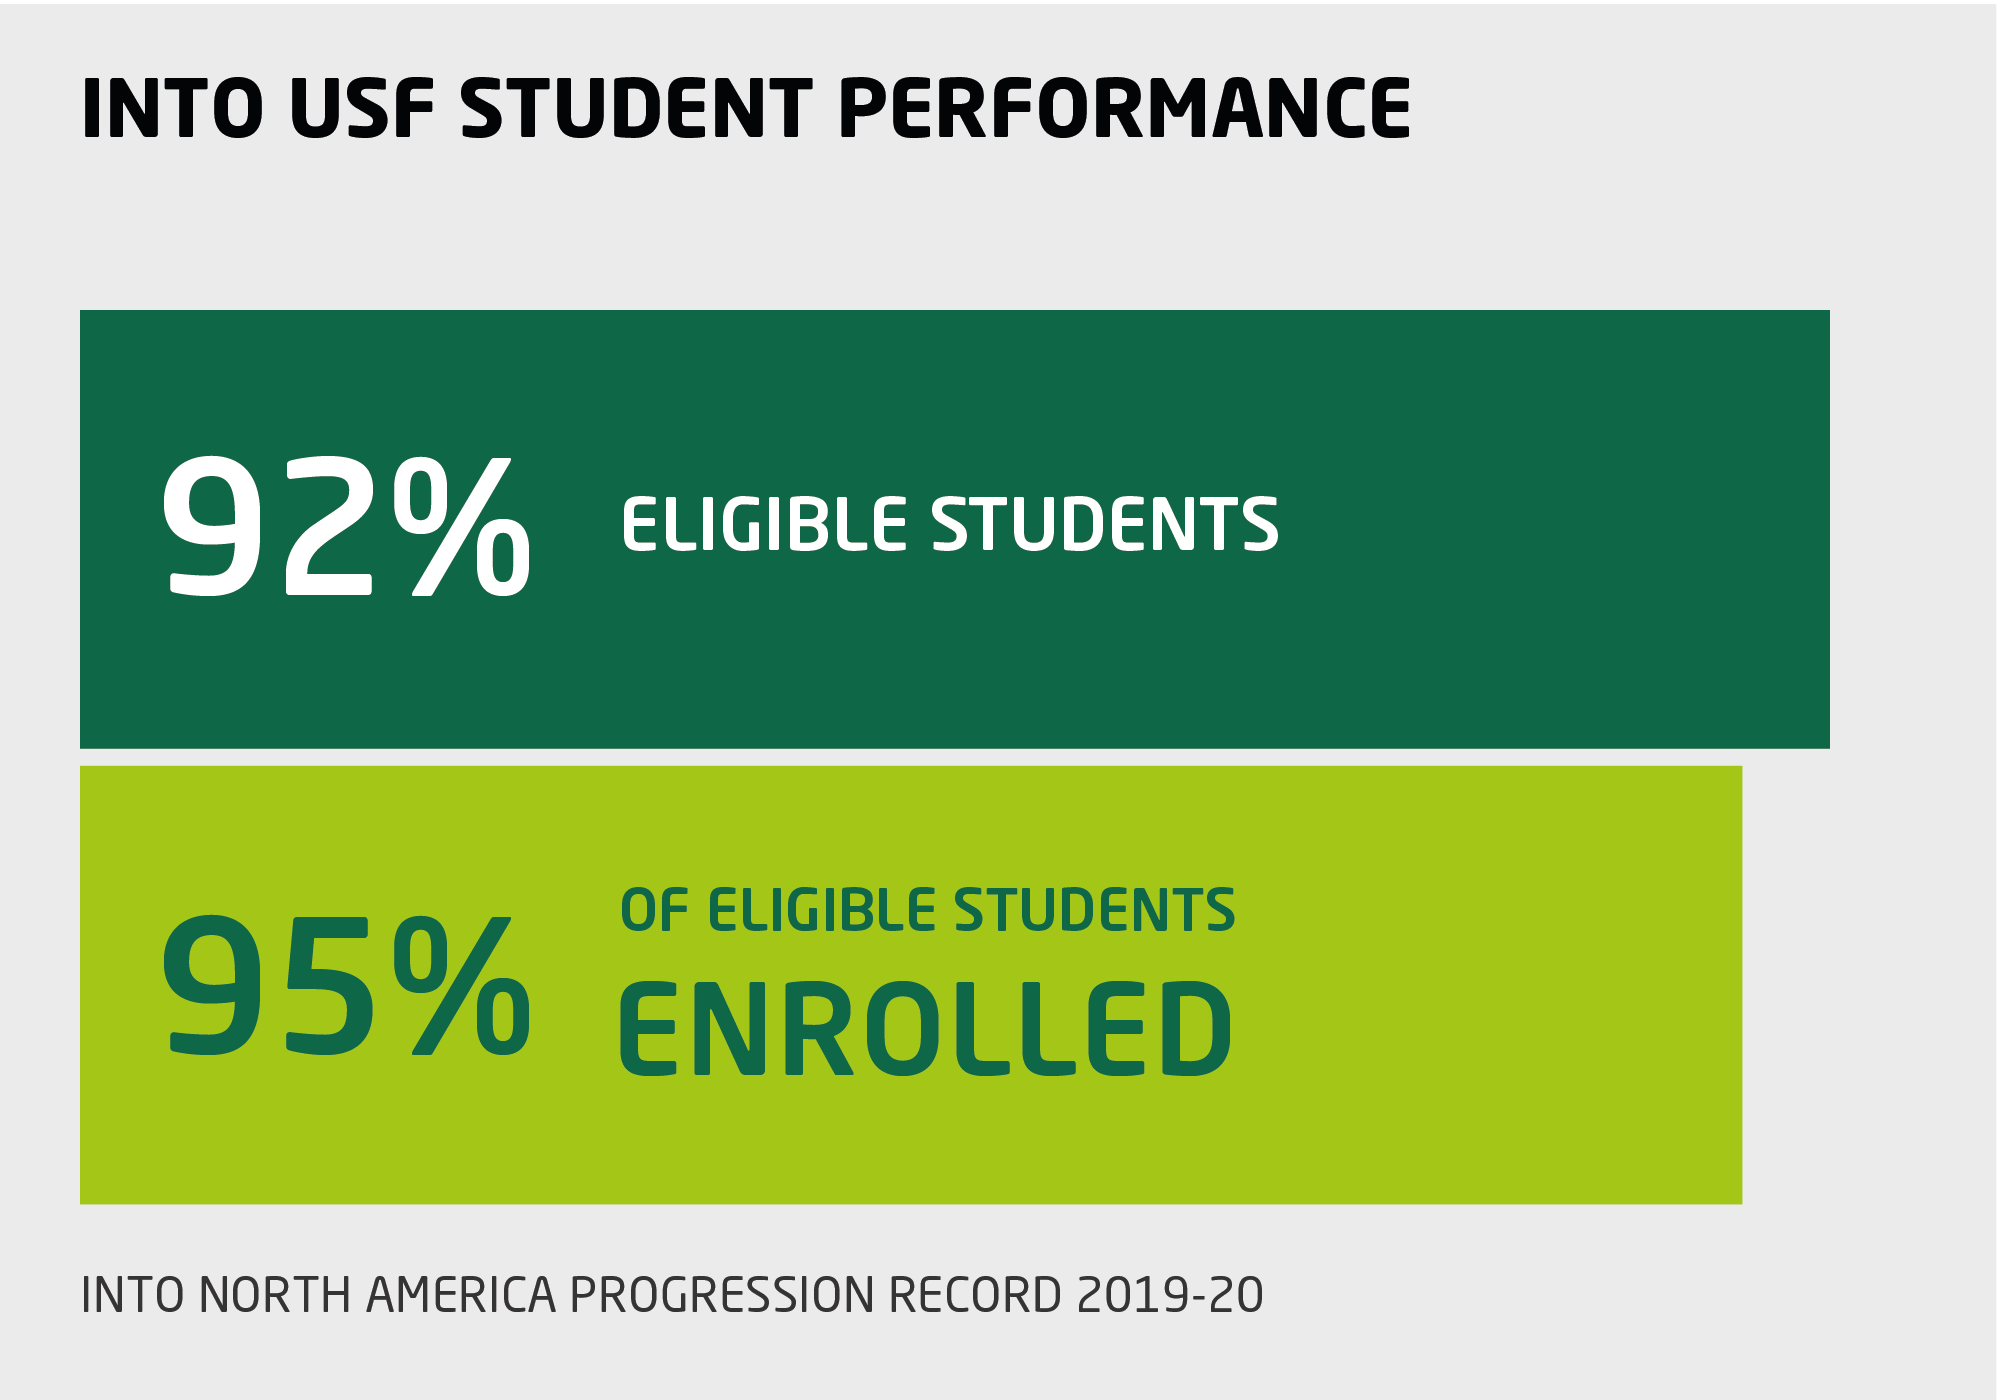 Infographic showing INTO University of South Florida student performance, with 92% of students eligible to progress to USF degree programs after Pathway, and 95% of those eligible enrolling.